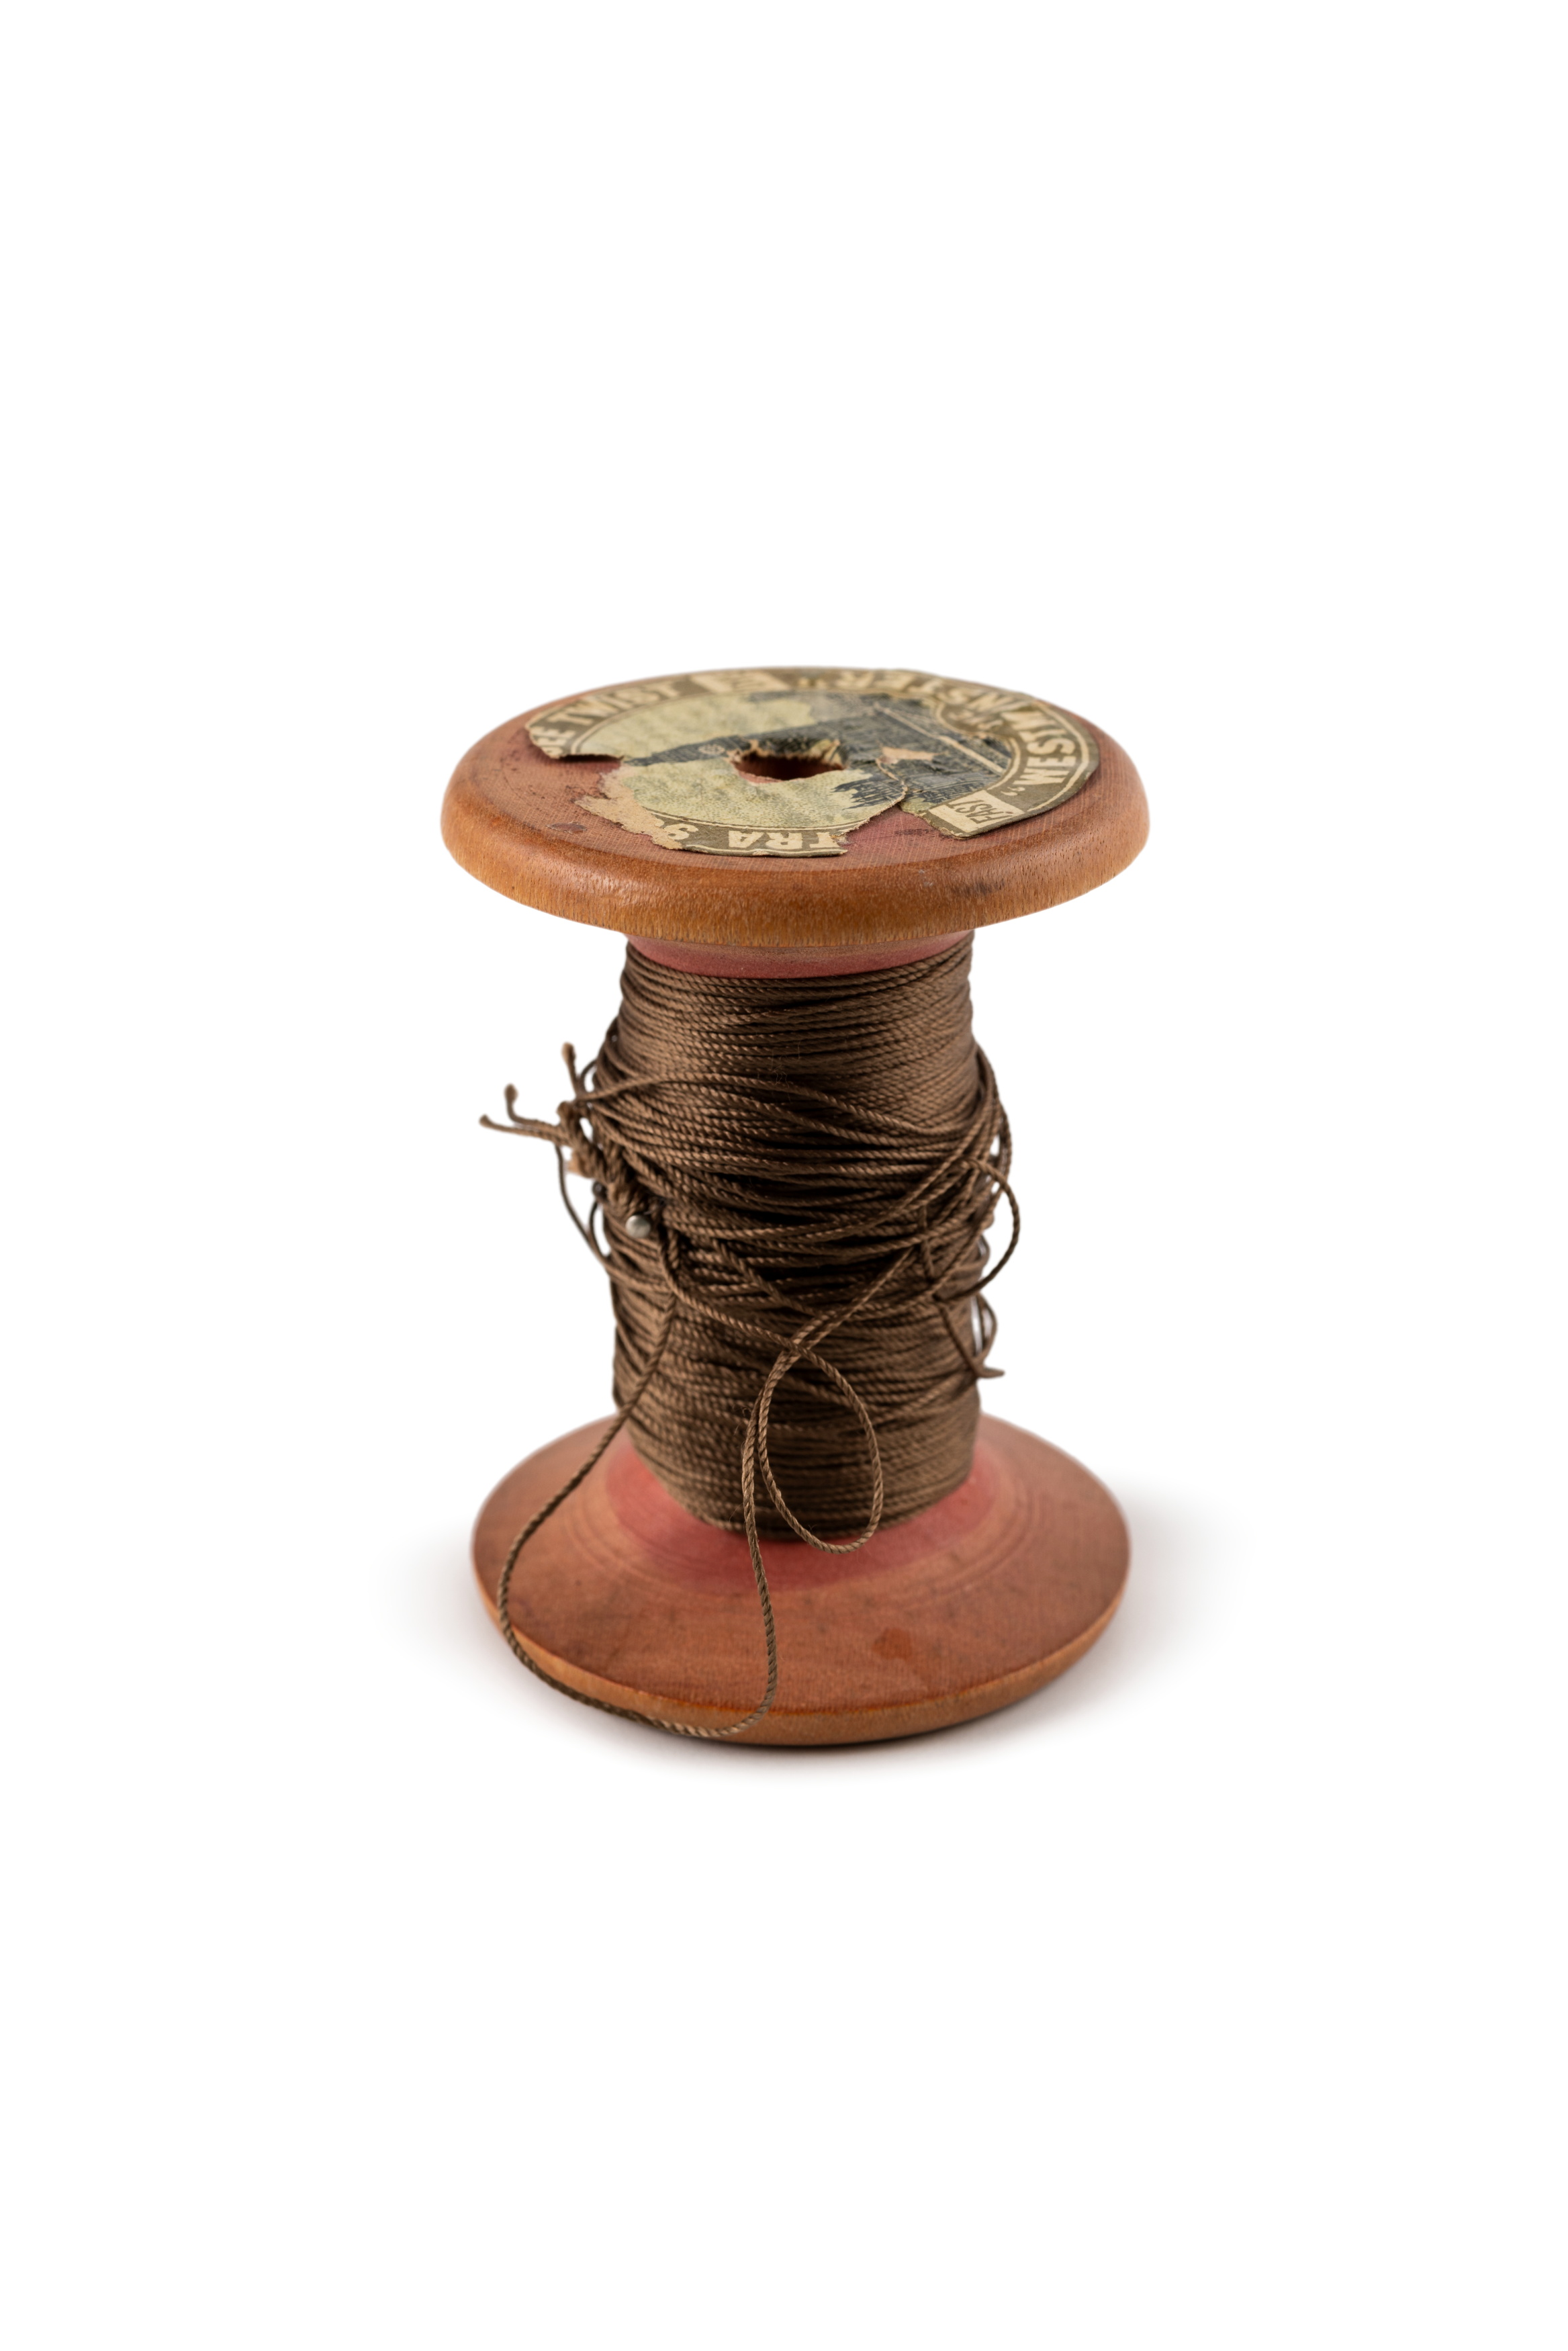 Thread reel used by Ron Gillman